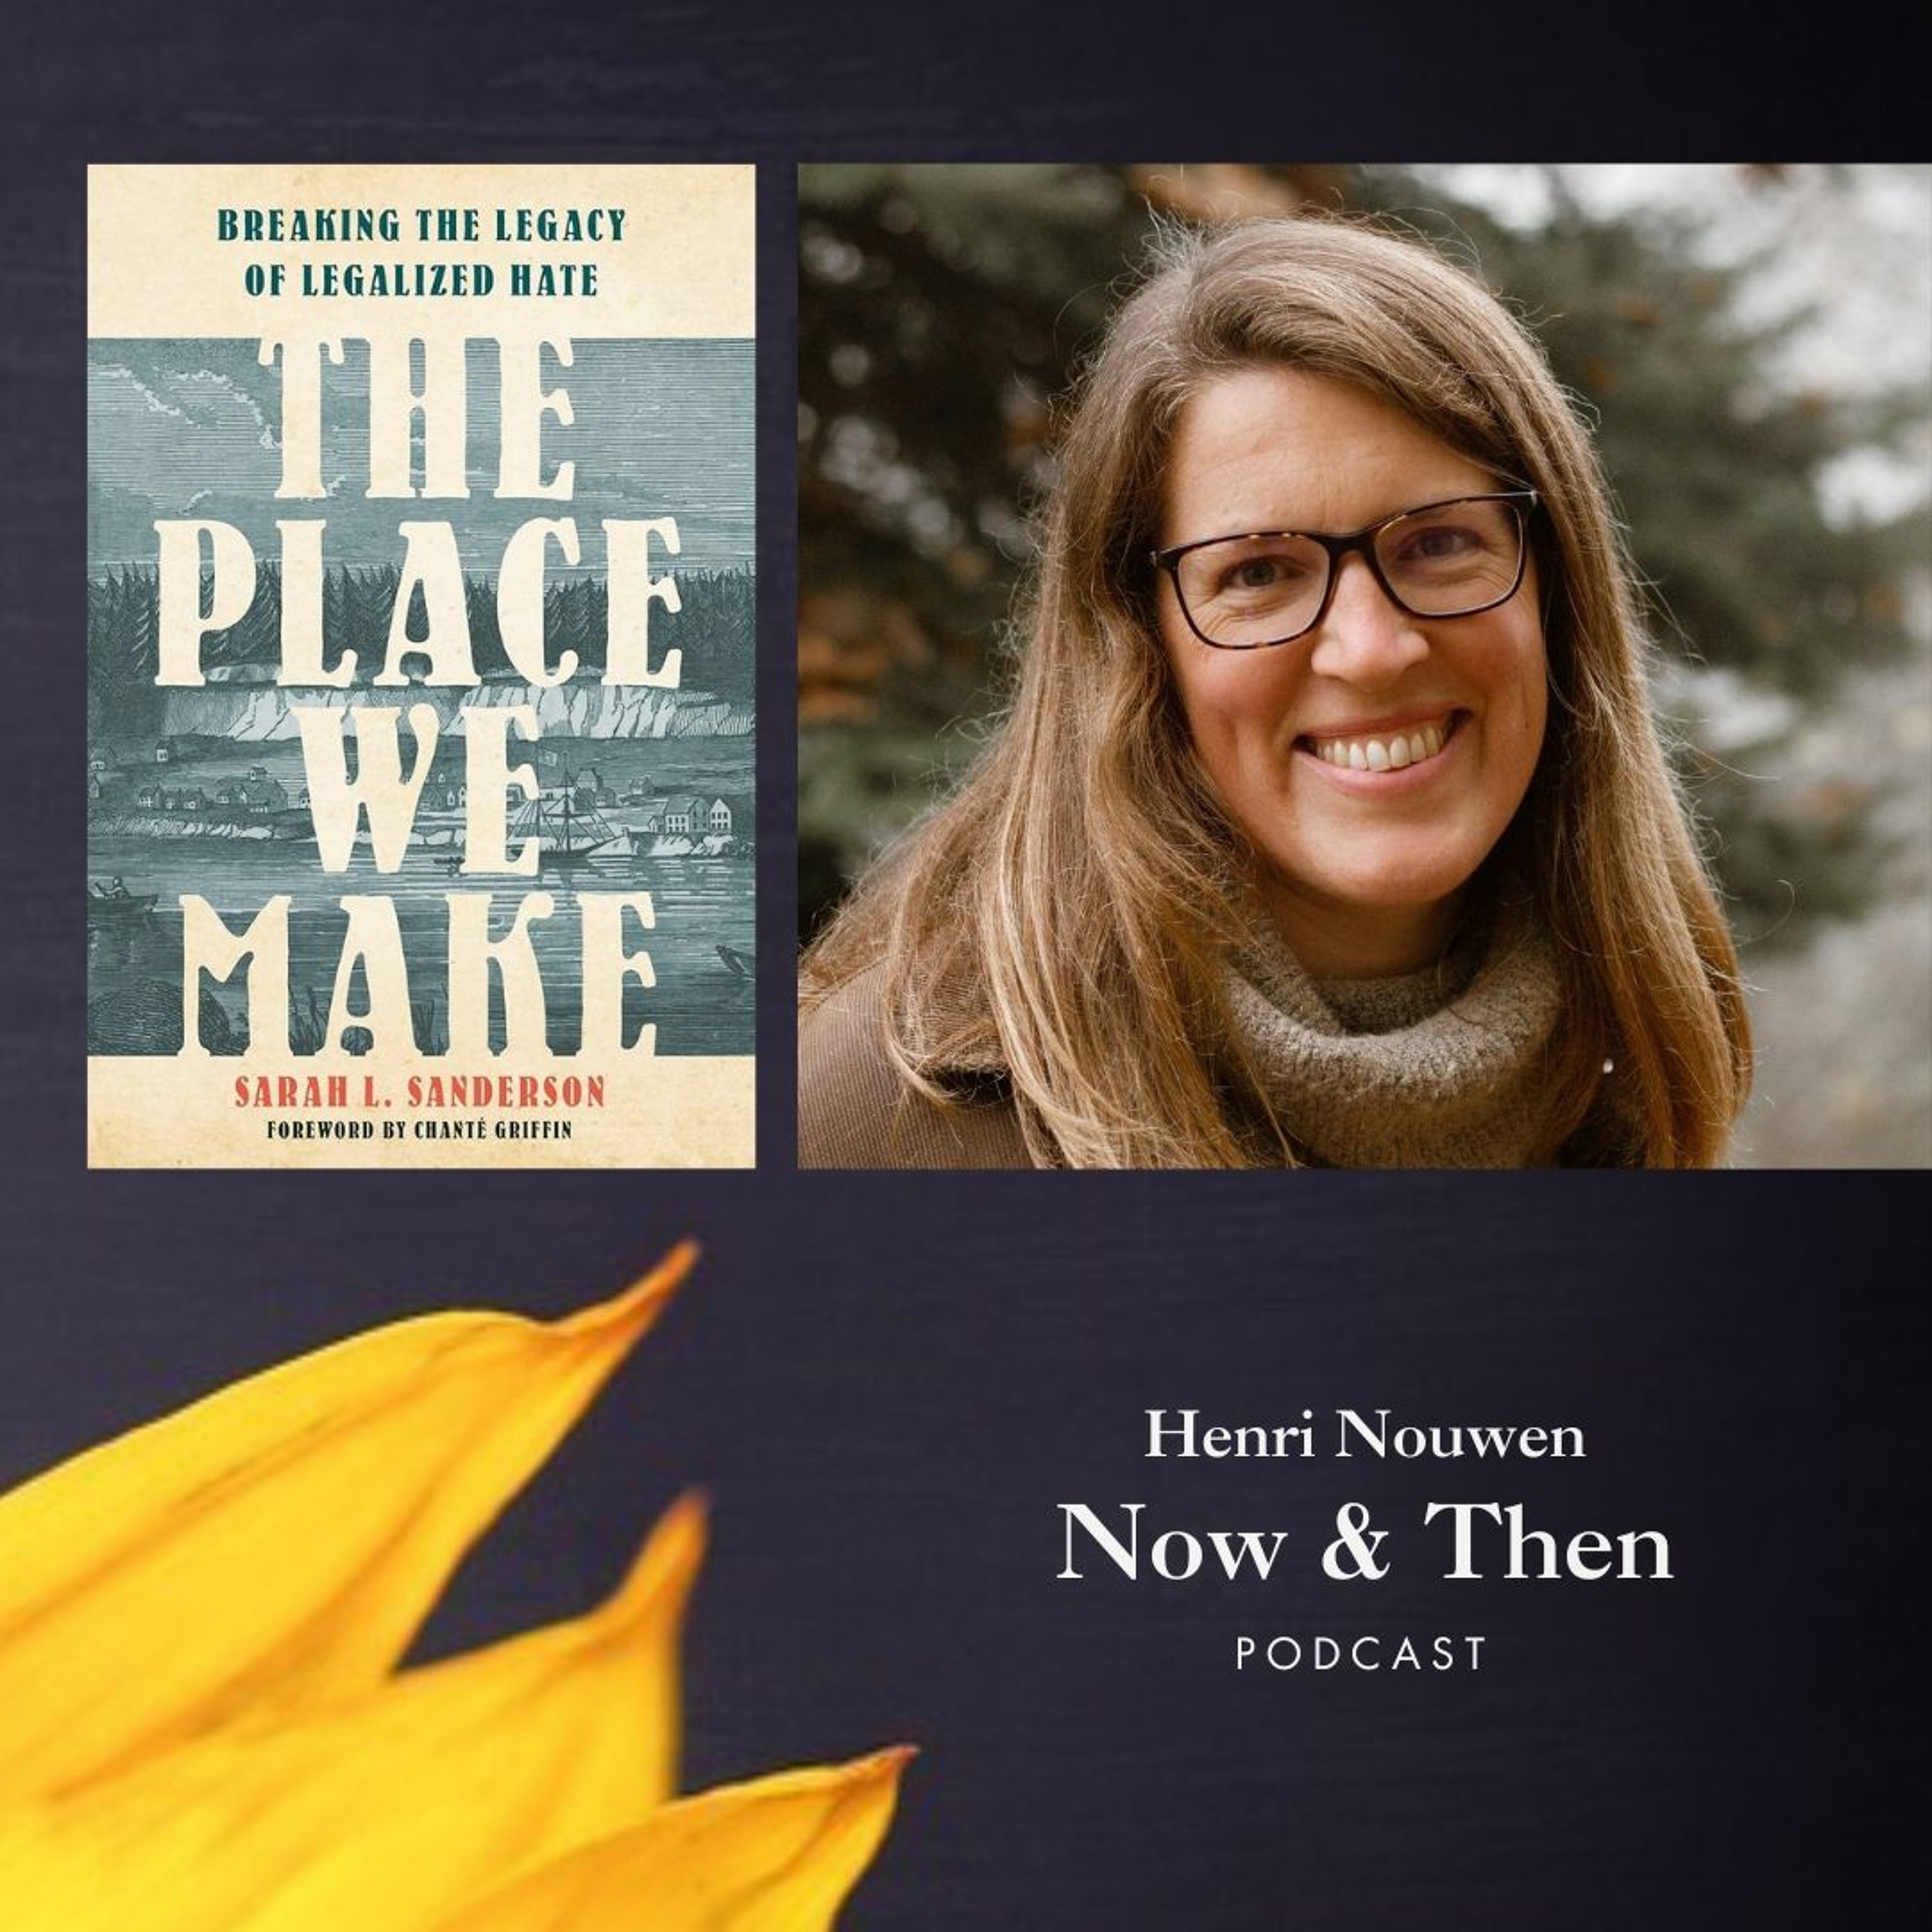 Henri Nouwen, Now & Then Podcast | Sarah Sanderson, "Breaking the Legacy of Legalized Hate"